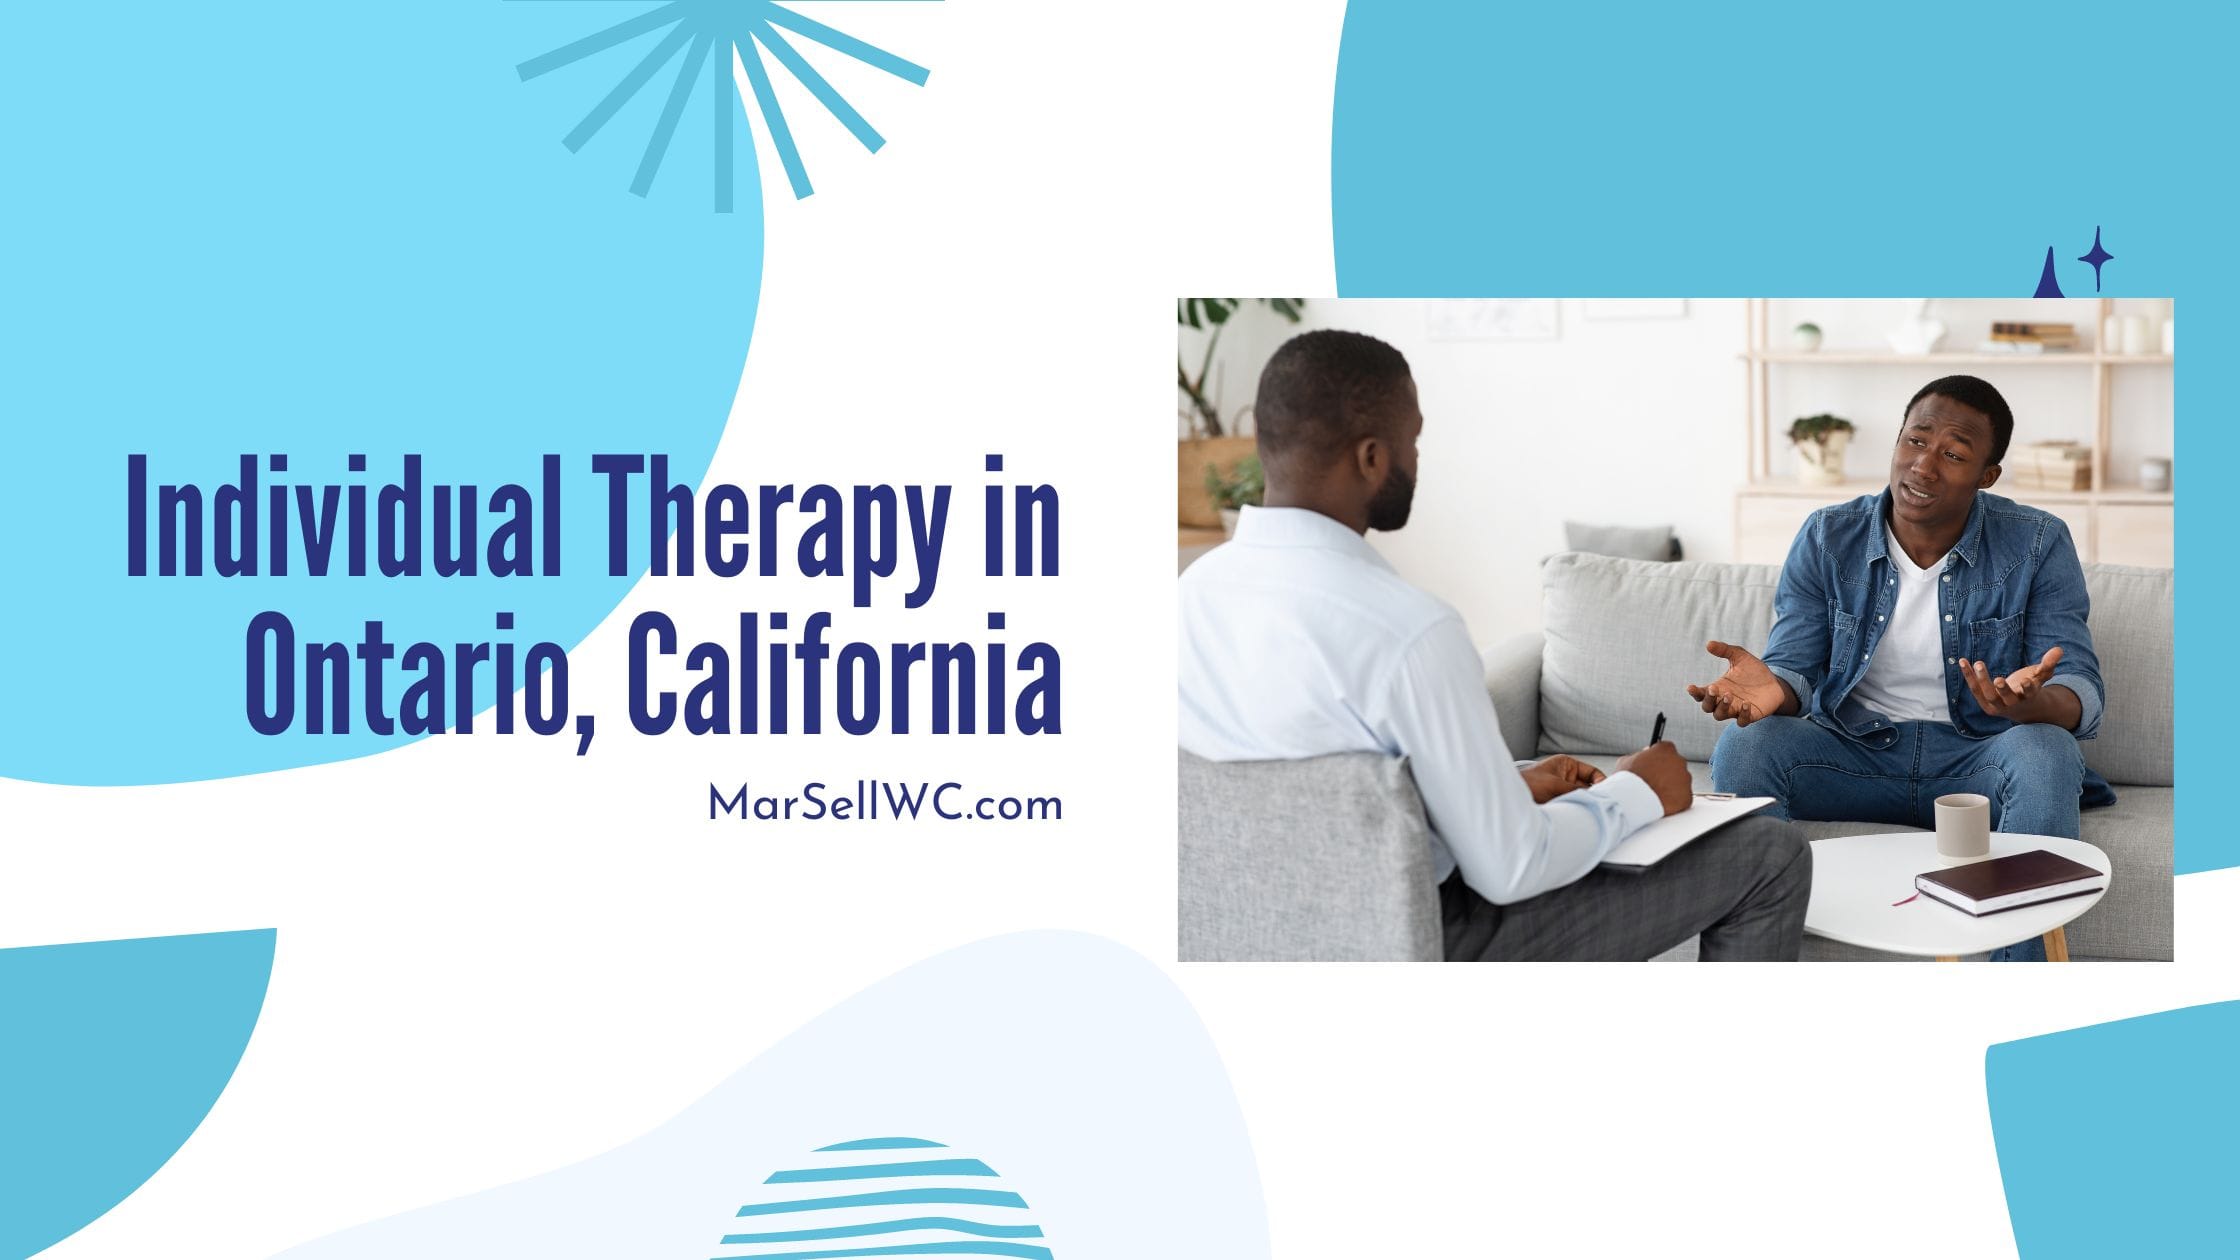 Individual Therapy in Ontario, California